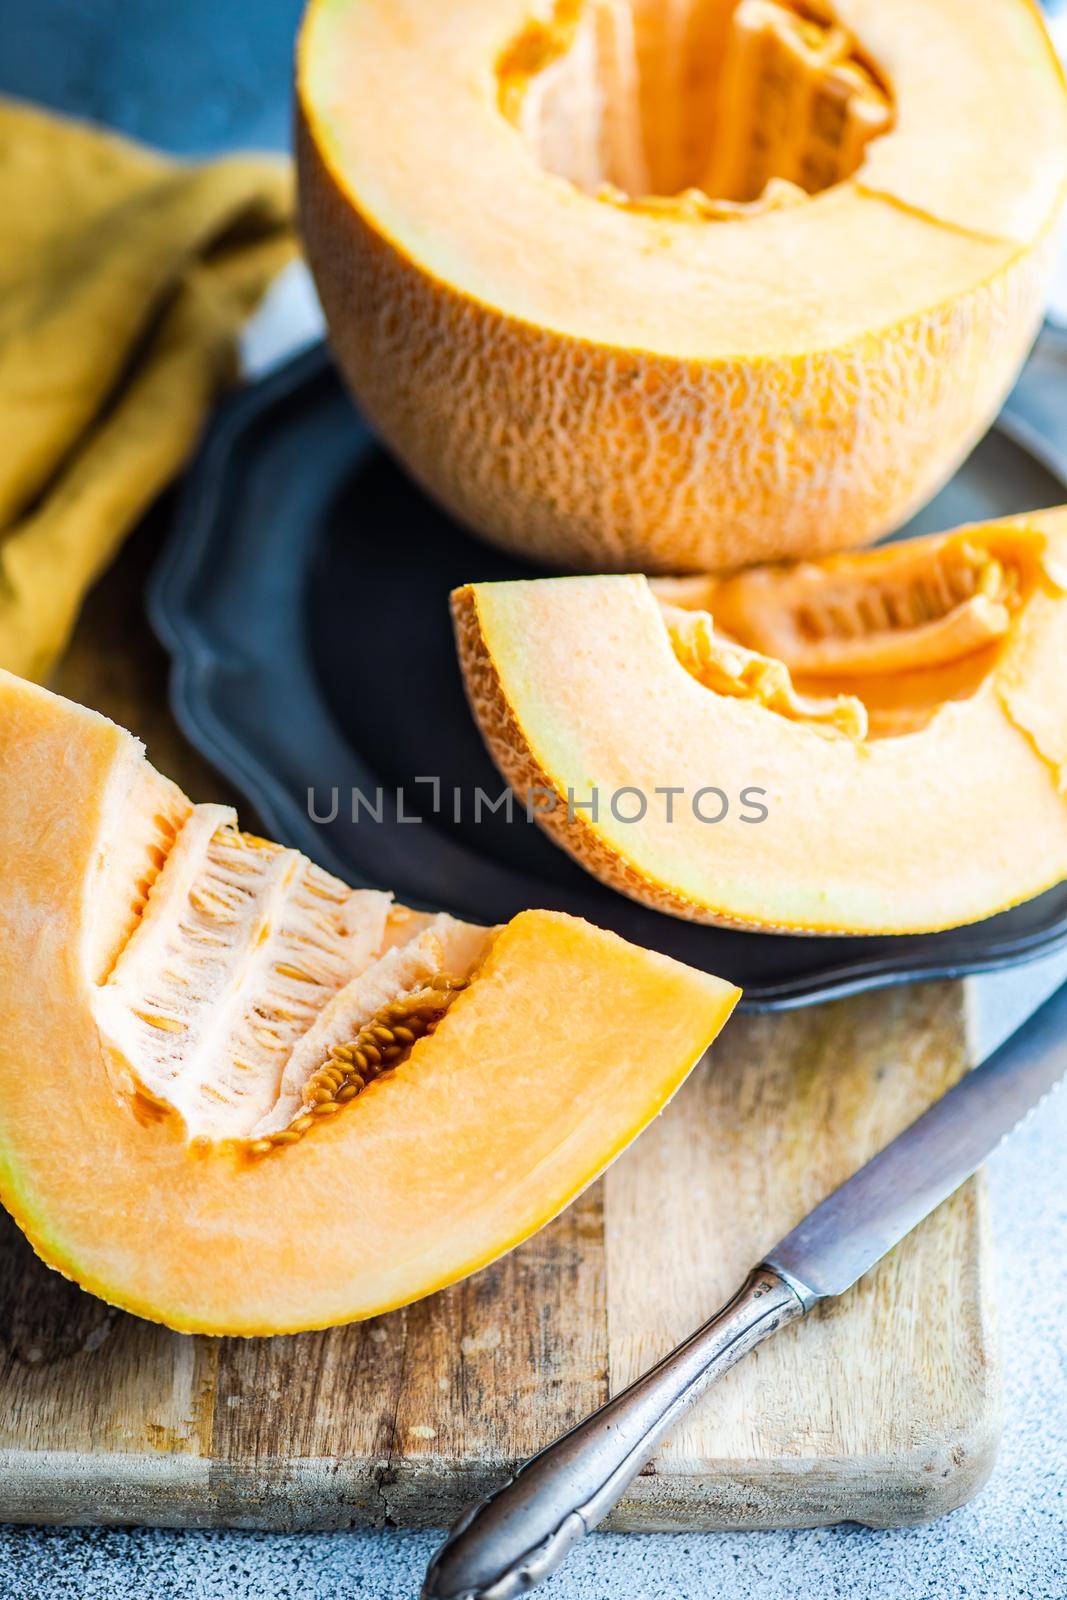 Ripe and tasty melon cut in slices and served for dessert on table